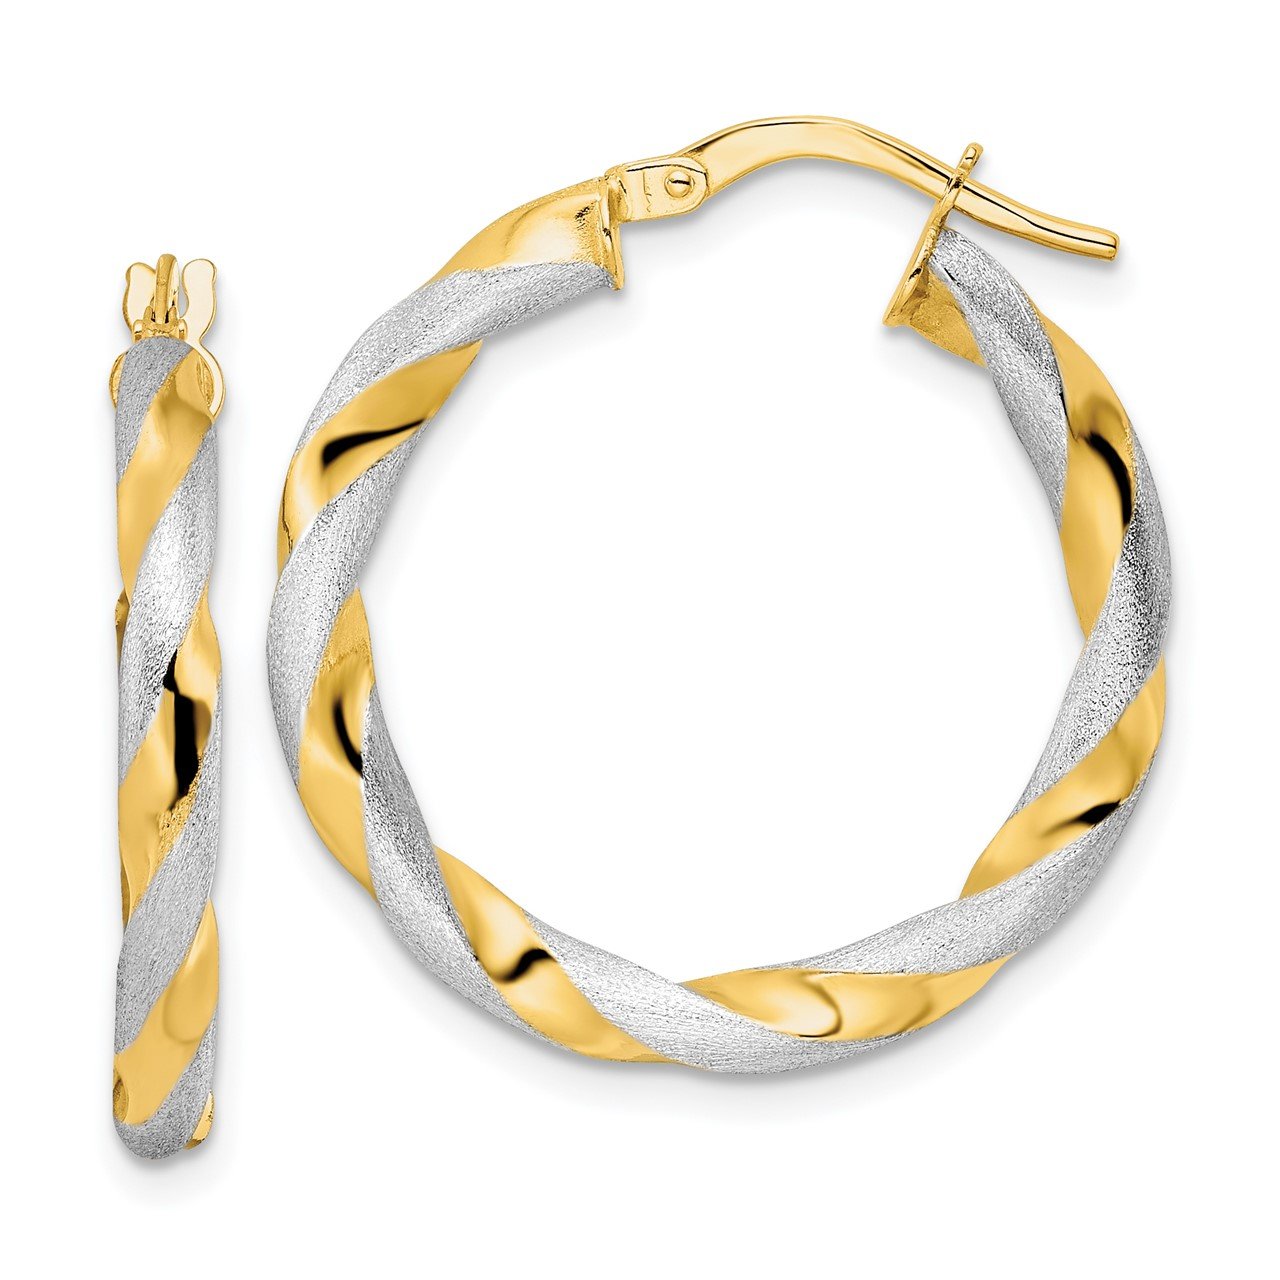 14K and Rhodium Brushed Polished Twisted Hoop Earrings